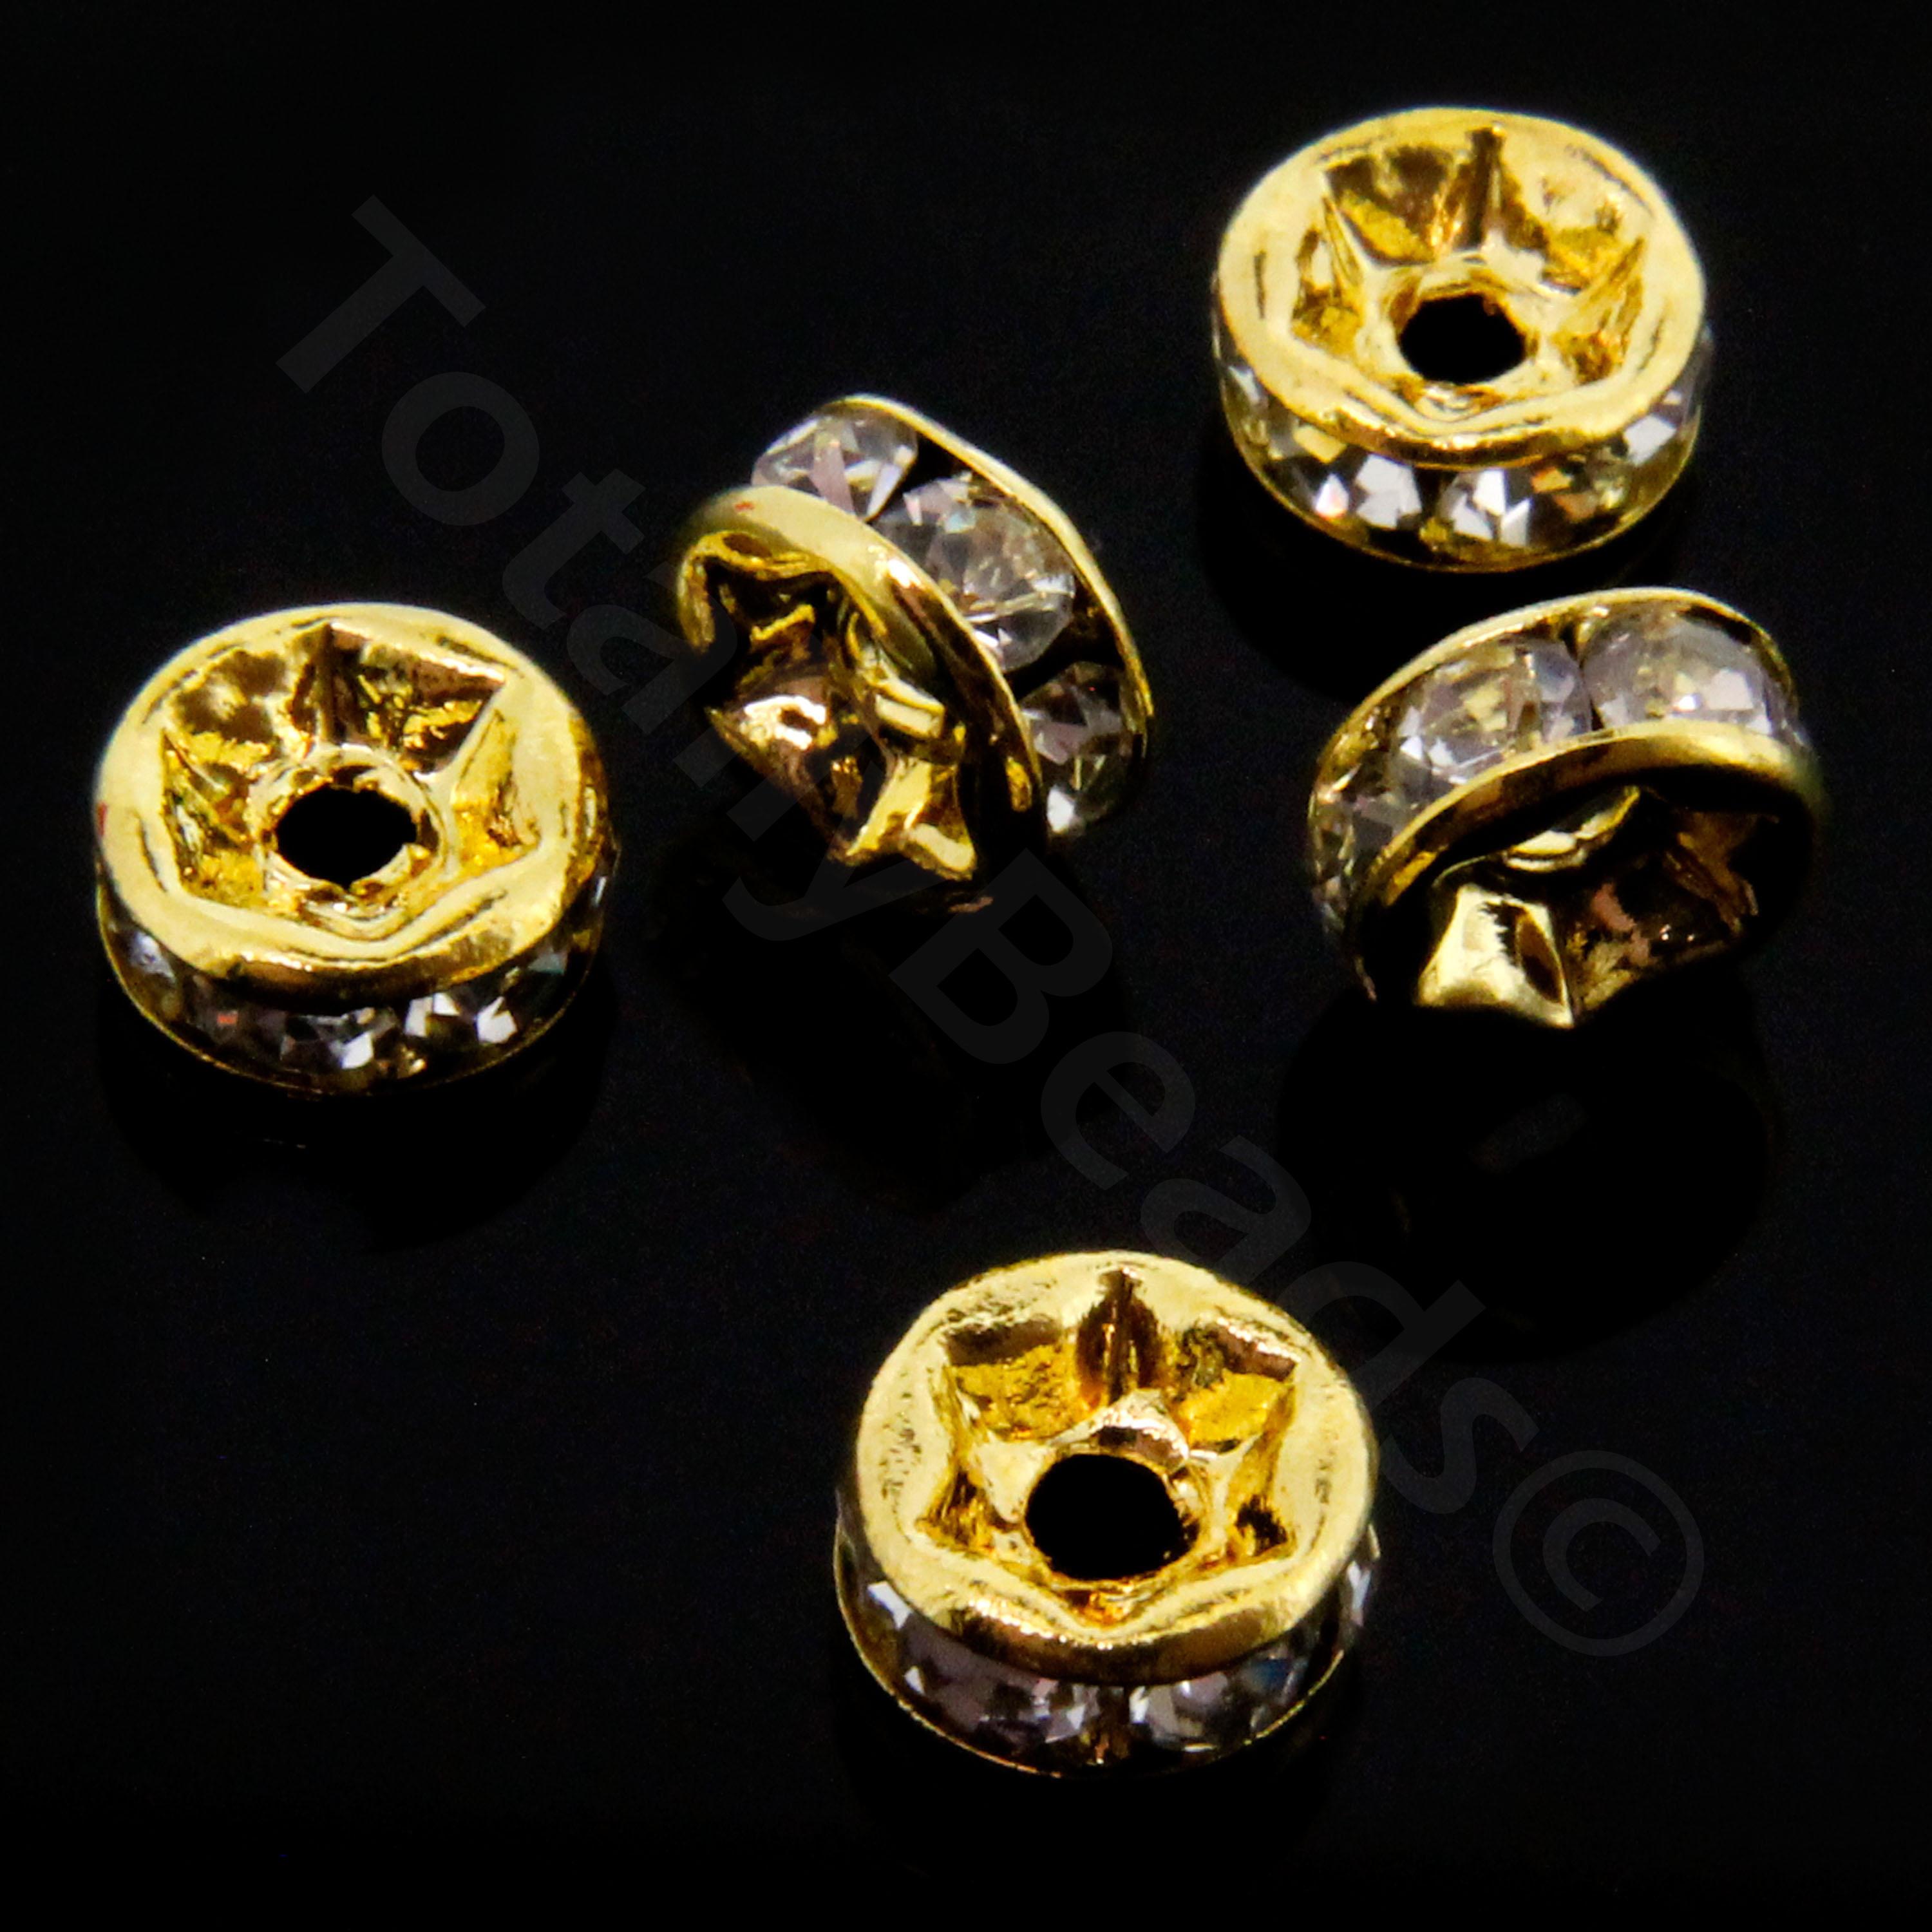 Crystal Diamante Gold Spacer - 100pcs - Flat Rondelle 6mm Crystal